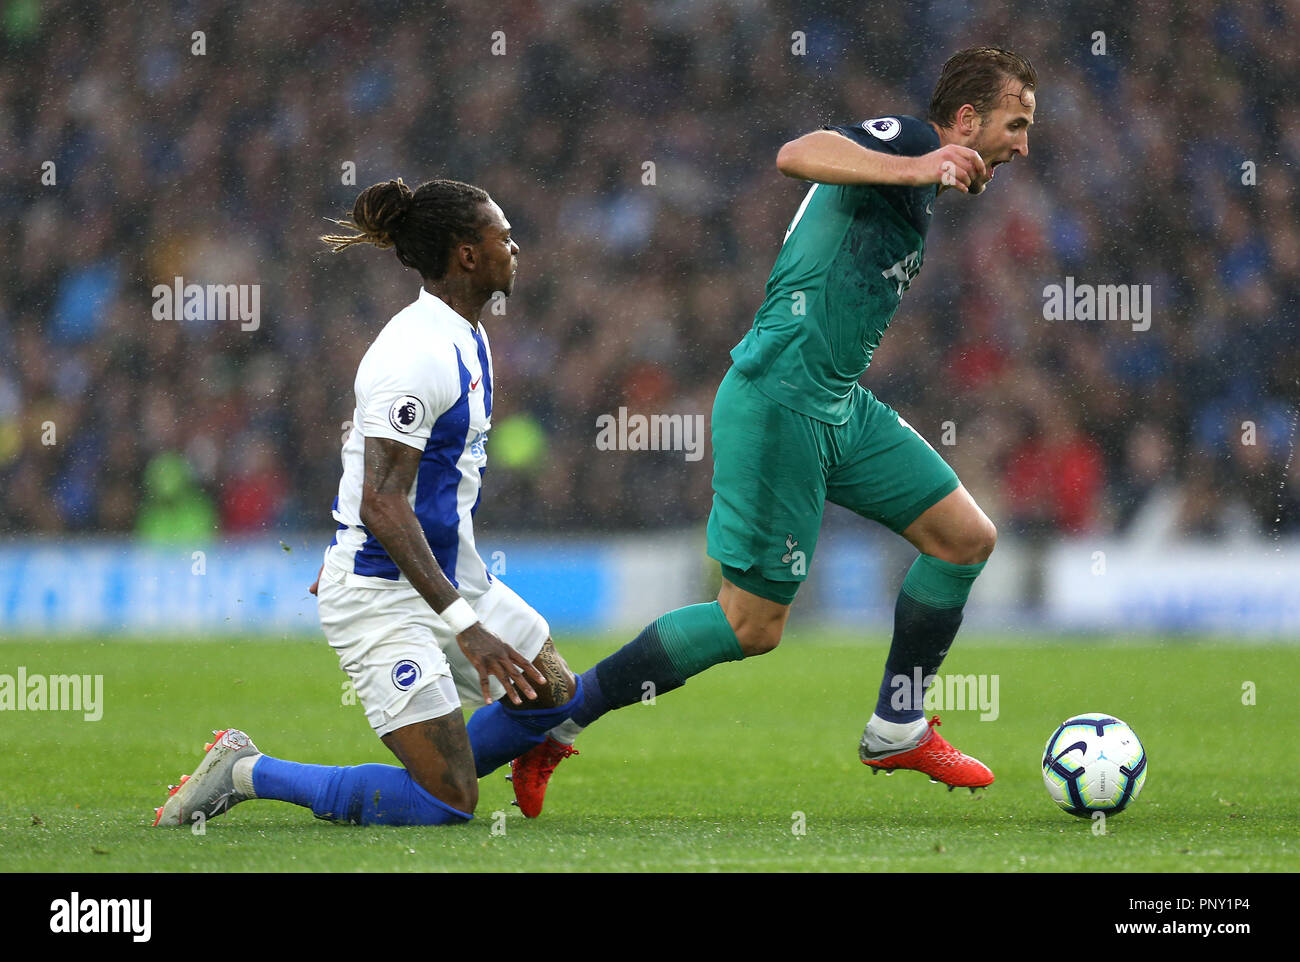 Brighton & Hove Albion's Gaetan Bong (left) and Tottenham Hotspur's Harry Kane (right) battle for the ball during the Premier League match at the AMEX Stadium, Brighton. PRESS ASSOCIATION Photo. Picture date: Saturday September 22, 2018. See PA story SOCCER Brighton. Photo credit should read: Steven Paston/PA Wire. RESTRICTIONS: No use with unauthorised audio, video, data, fixture lists, club/league logos or 'live' services. Online in-match use limited to 120 images, no video emulation. No use in betting, games or single club/league/player publications. Stock Photo